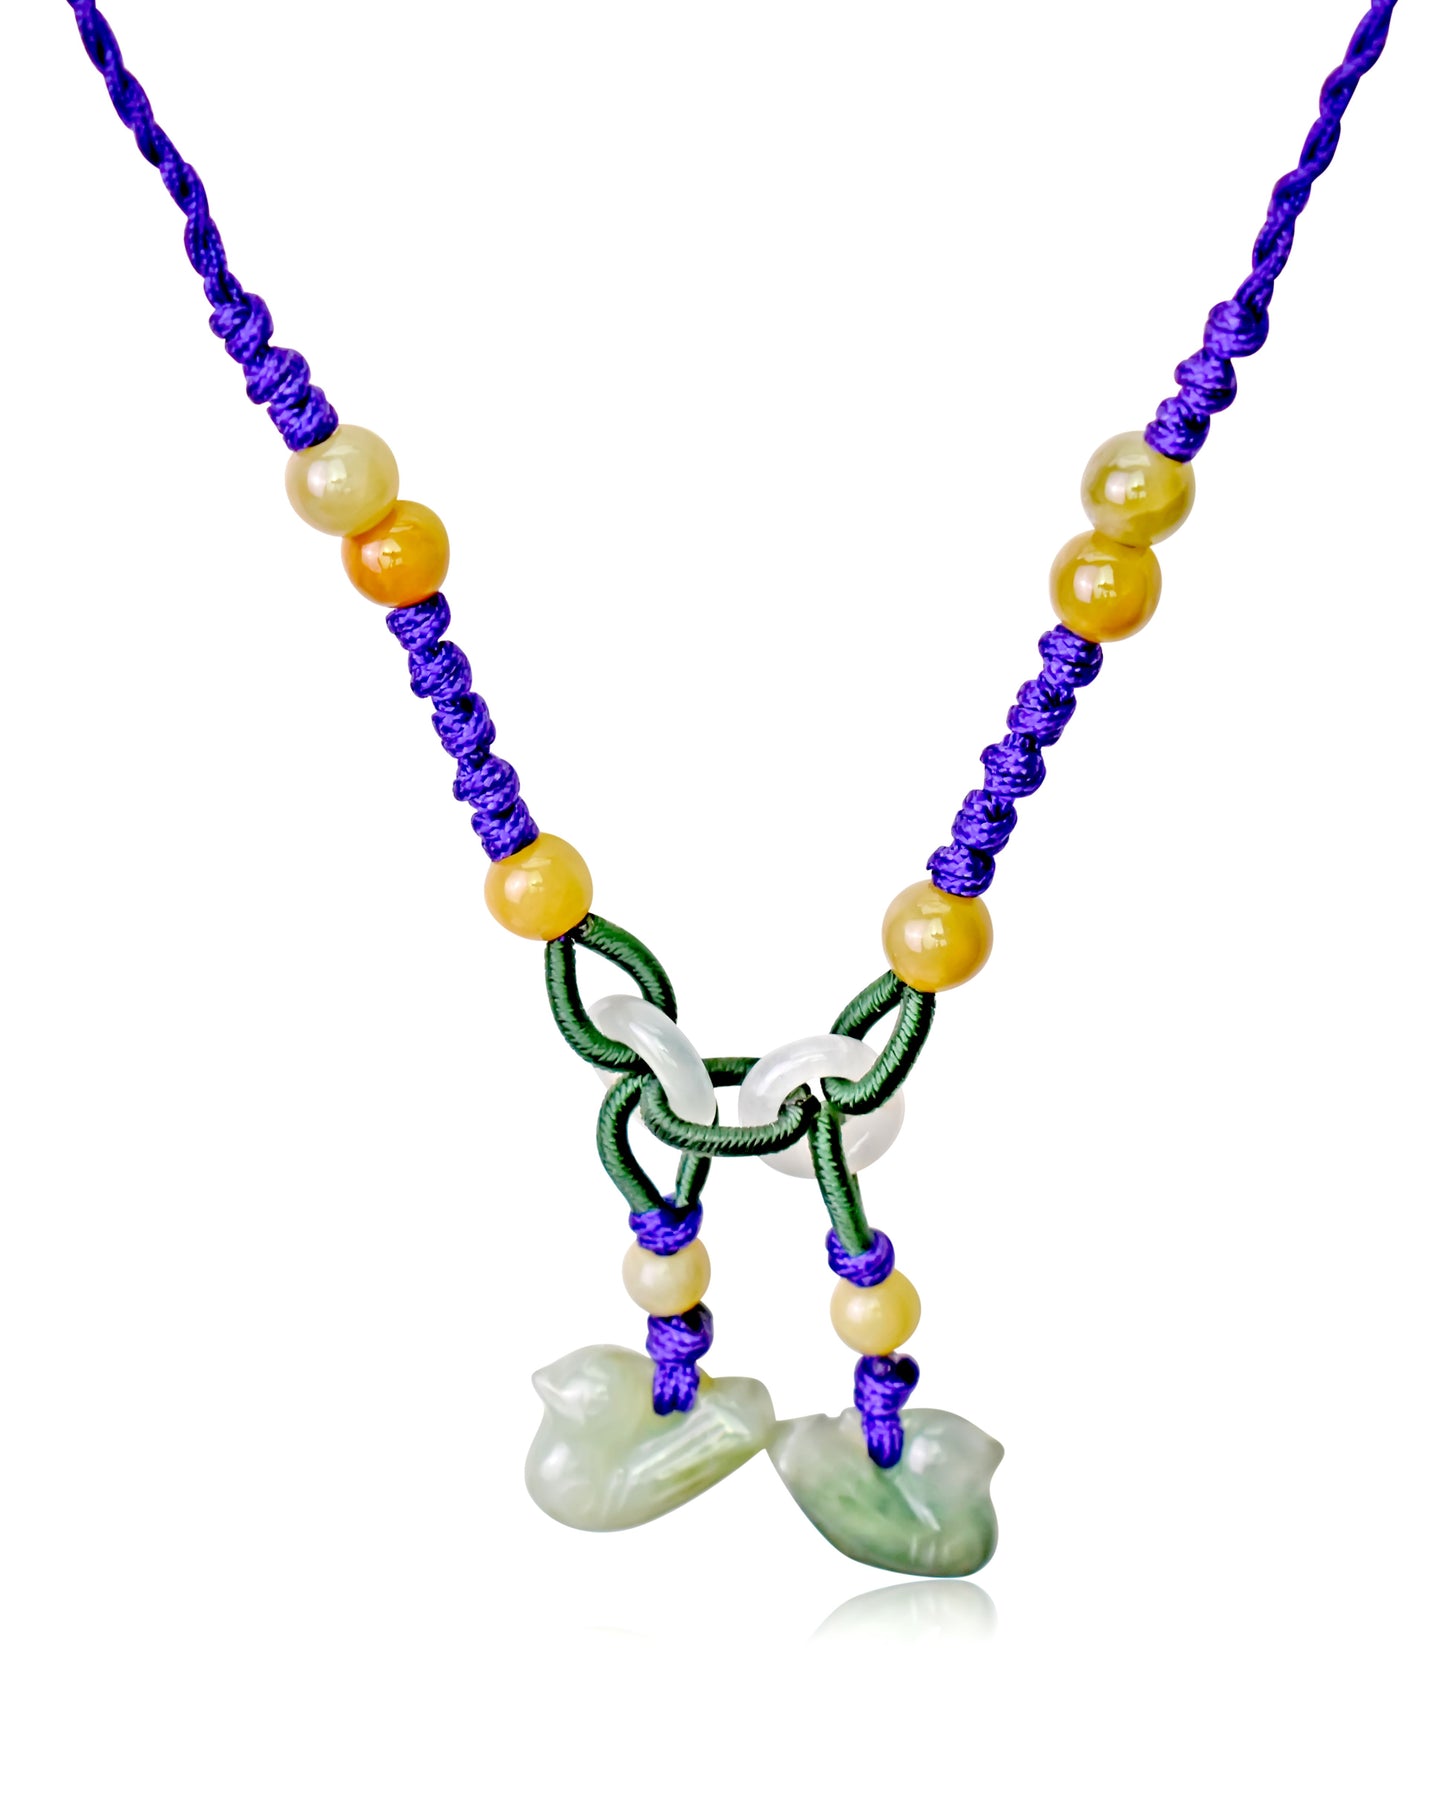 Feel Your Inner Strength with Charming Doves Jade Necklace made with Purple Cord